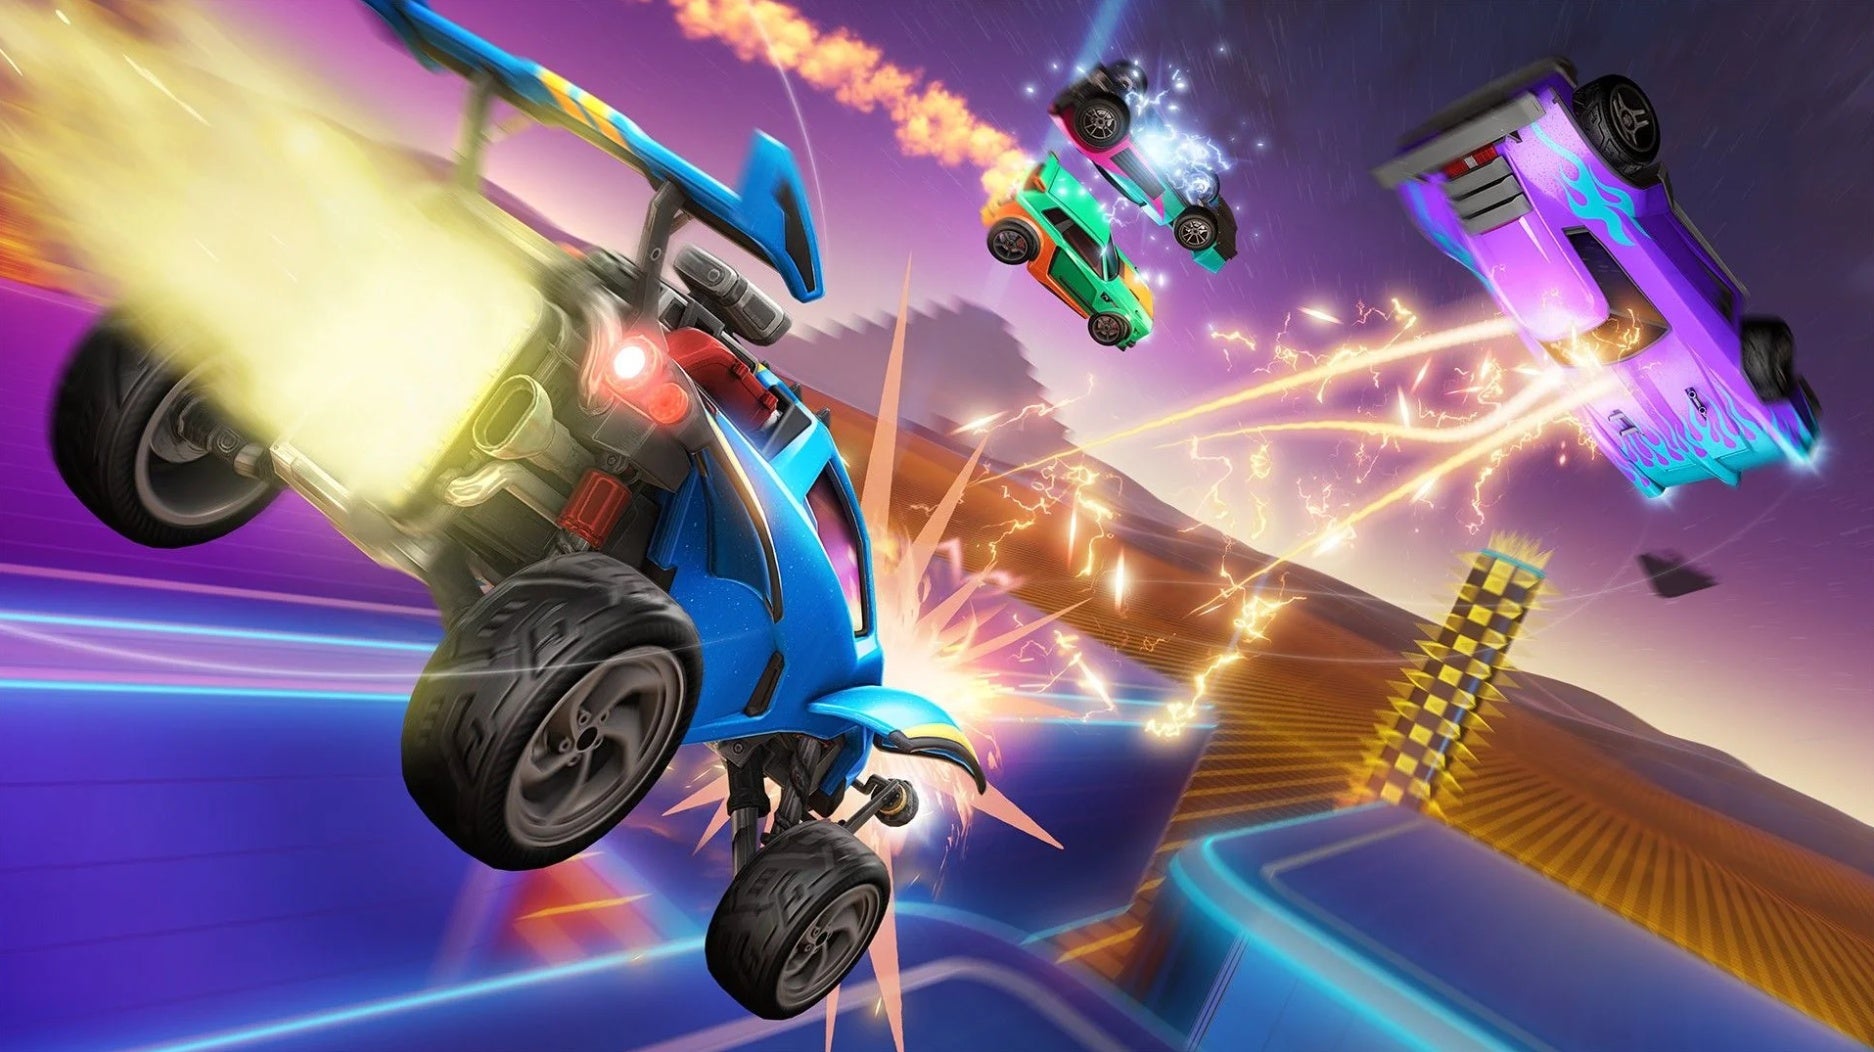 A promo image for Rocket League's time-limited Knockout Bash game mode, which is like battle royale with cars.